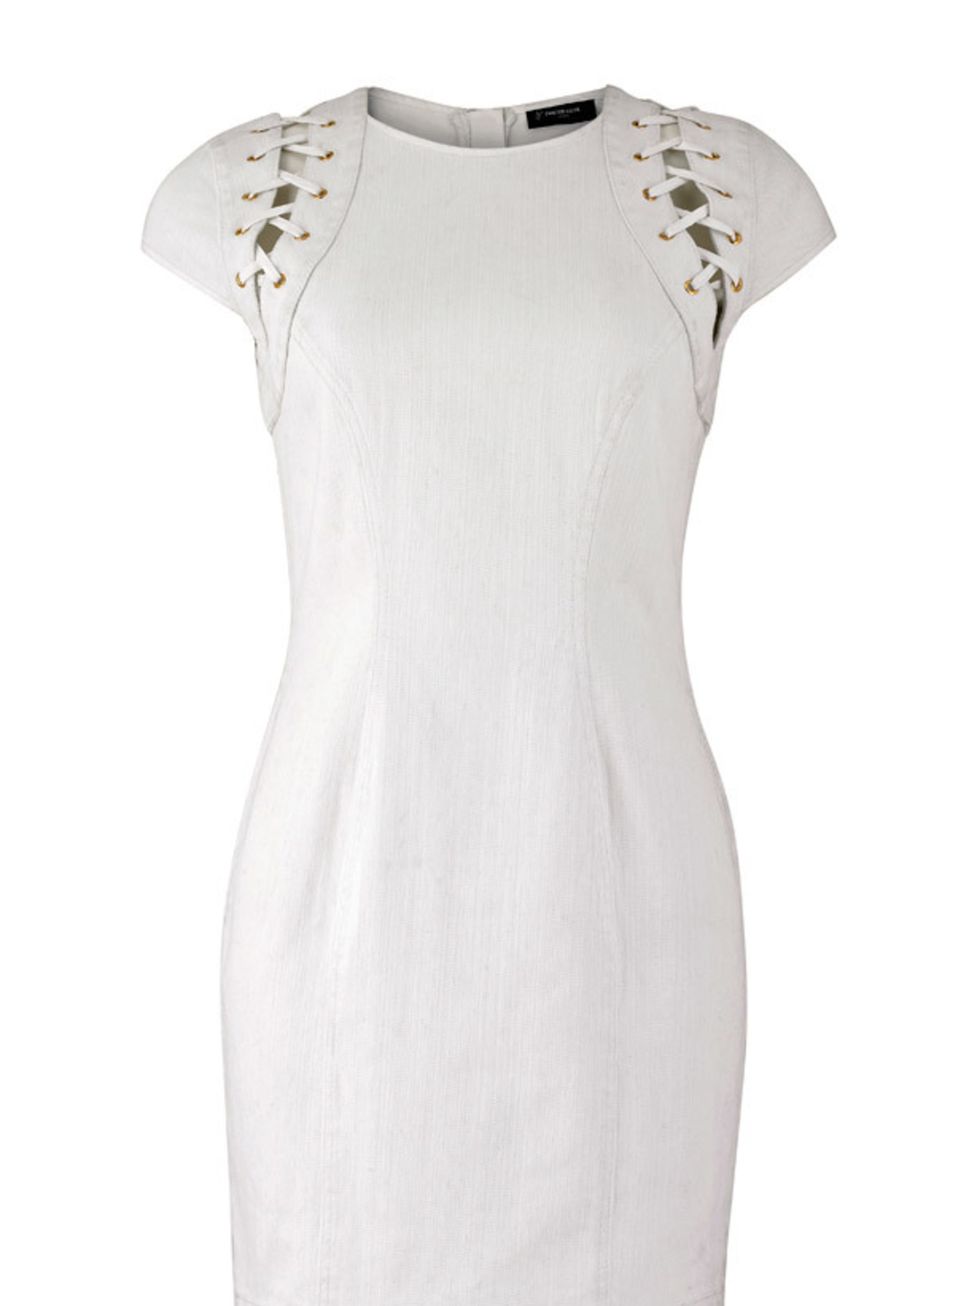 <p>White lace detail dress, £35, by New Look Limited Edition (0500 454 094)</p>